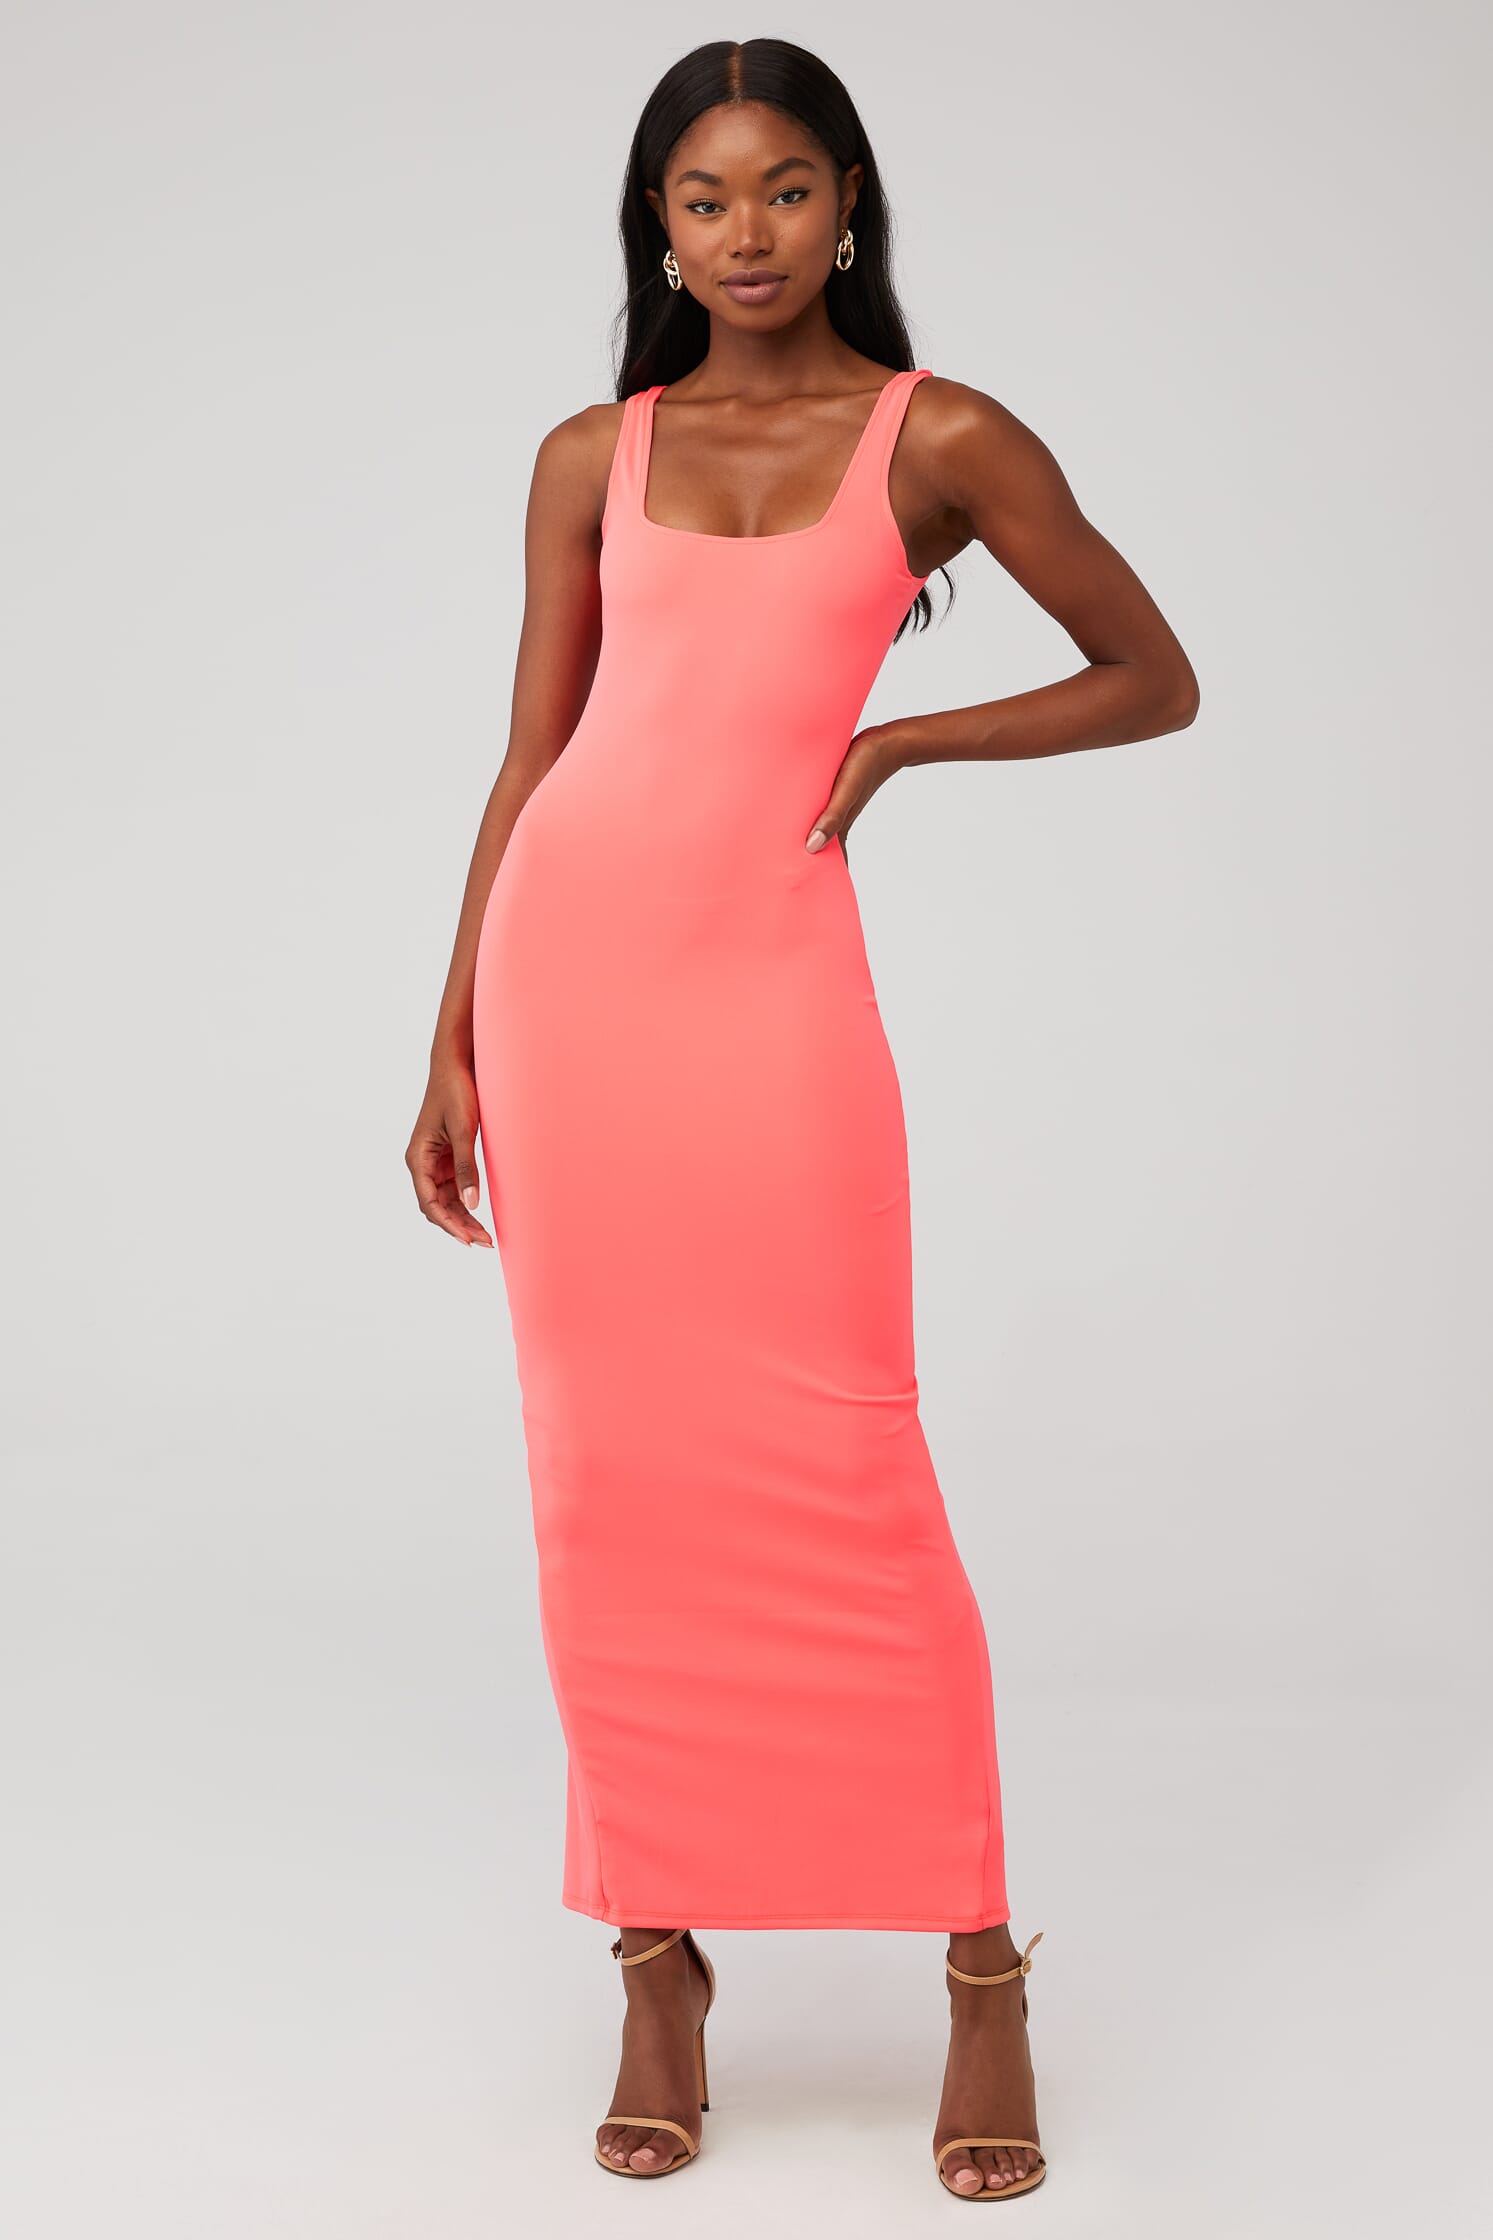 https://images.fashionpass.com/products/scuba-modern-tank-maxi-dress-good-american-fiery-coral-a57-1.png?profile=a